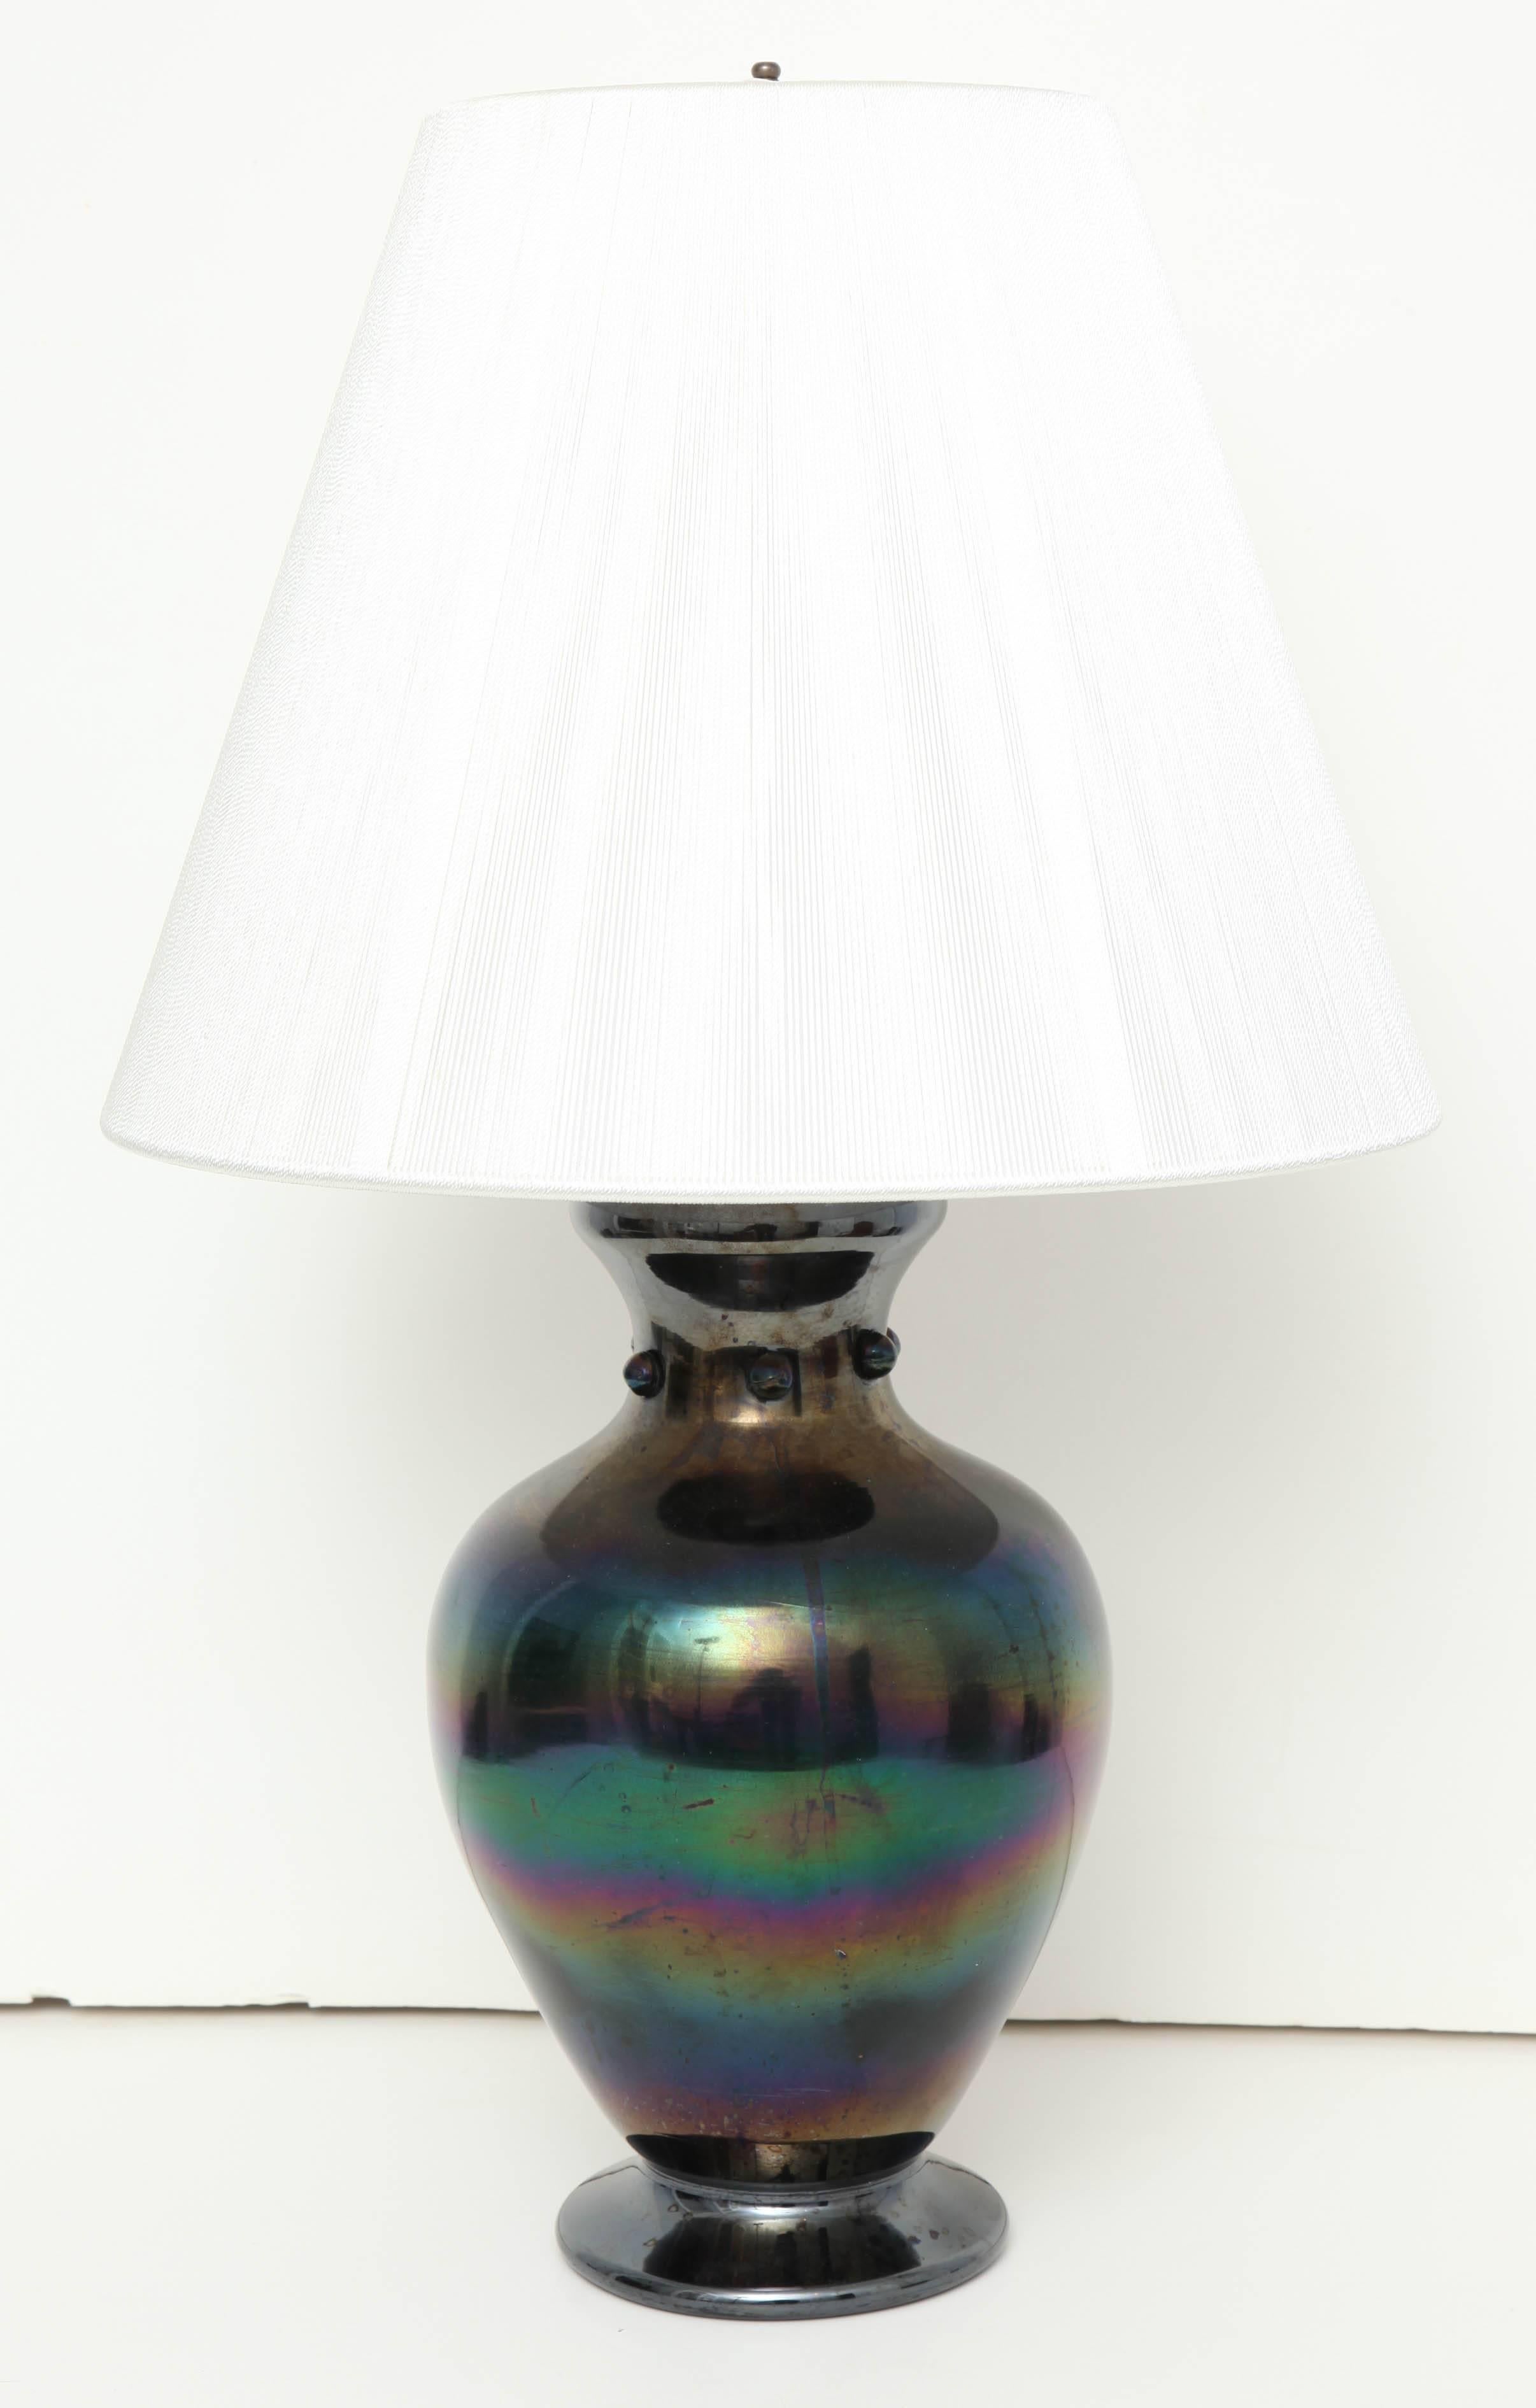 A 19th century English iridescent glass vase marked on the underside Webb's Patent JT H.R. now mounted as a lamp.